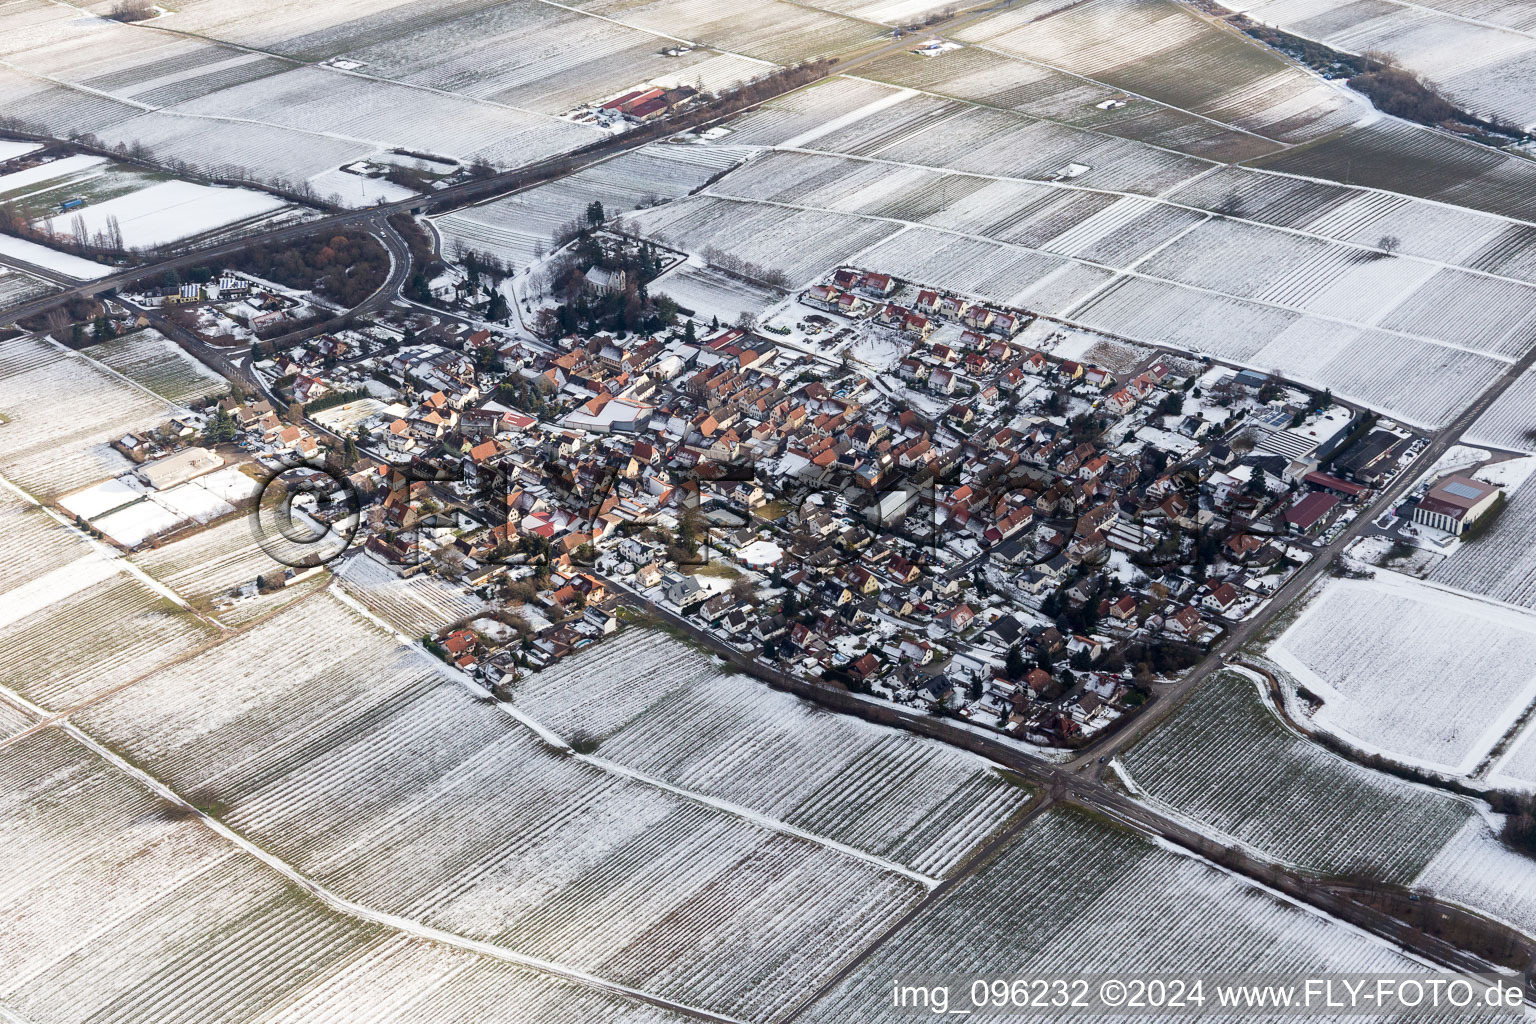 Wintry snowy Village - view on the edge of agricultural fields and farmland in Walsheim in the state Rhineland-Palatinate, Germany